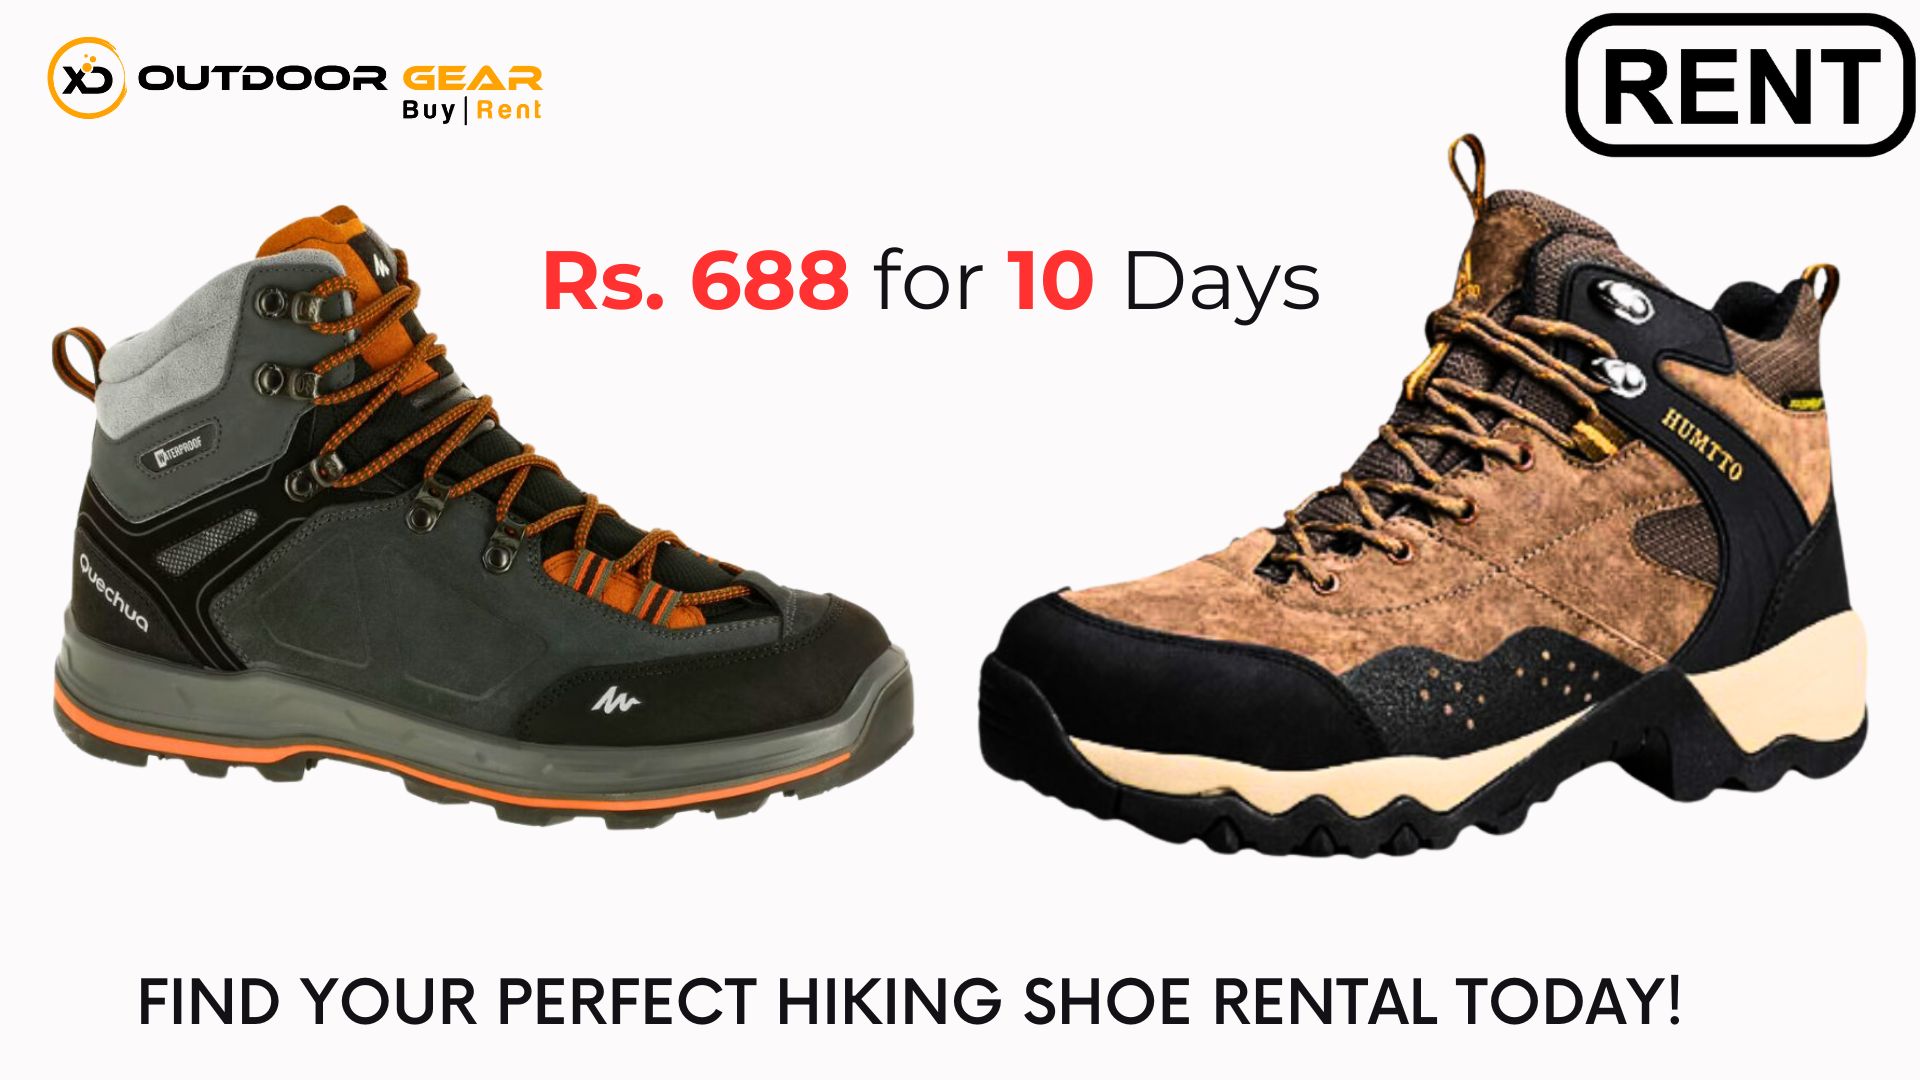 Where Can I Rent Hiking Shoes?